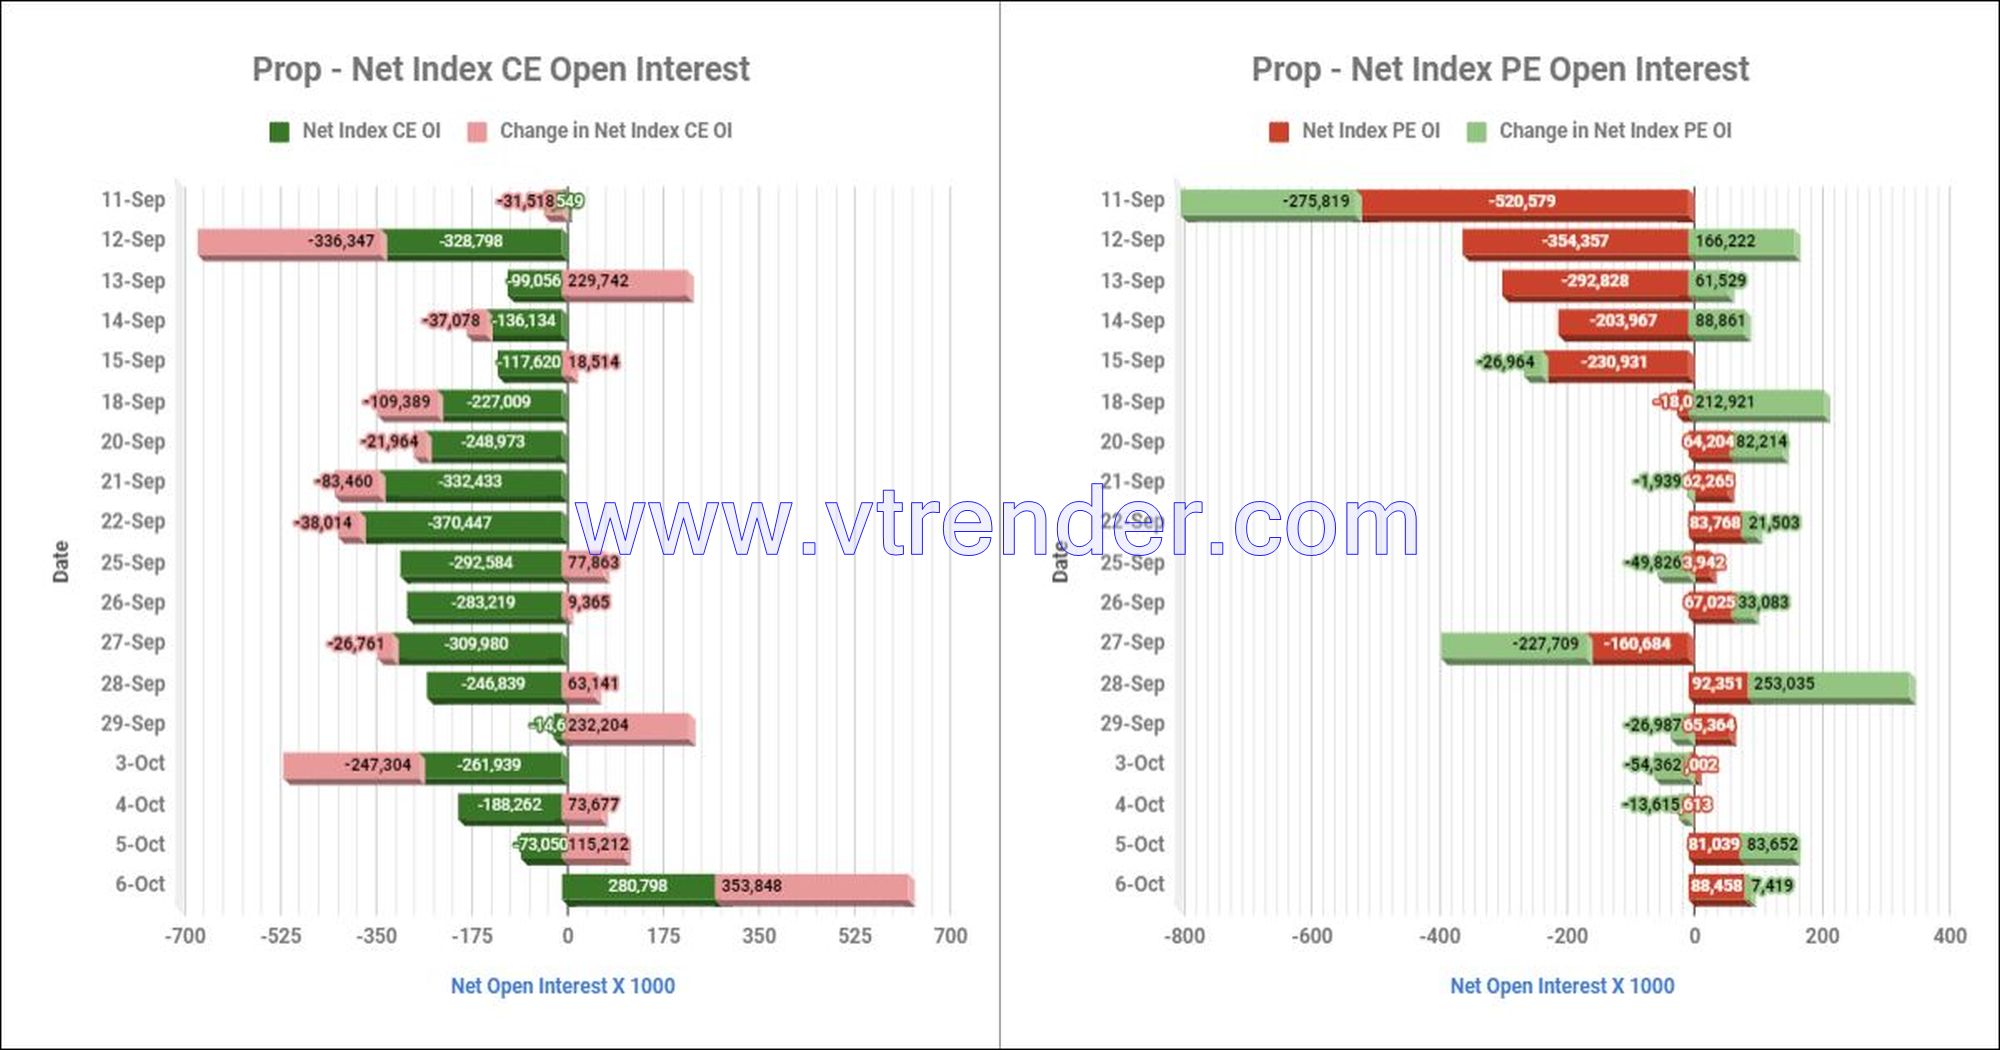 Proinop06Oct Participantwise Net Open Interest And Net Equity Investments – 6Th Oct 2023 Ce, Client, Dii, Fii, Index Futures, Index Options, Open Interest, Pe, Prop, Stocks Futures